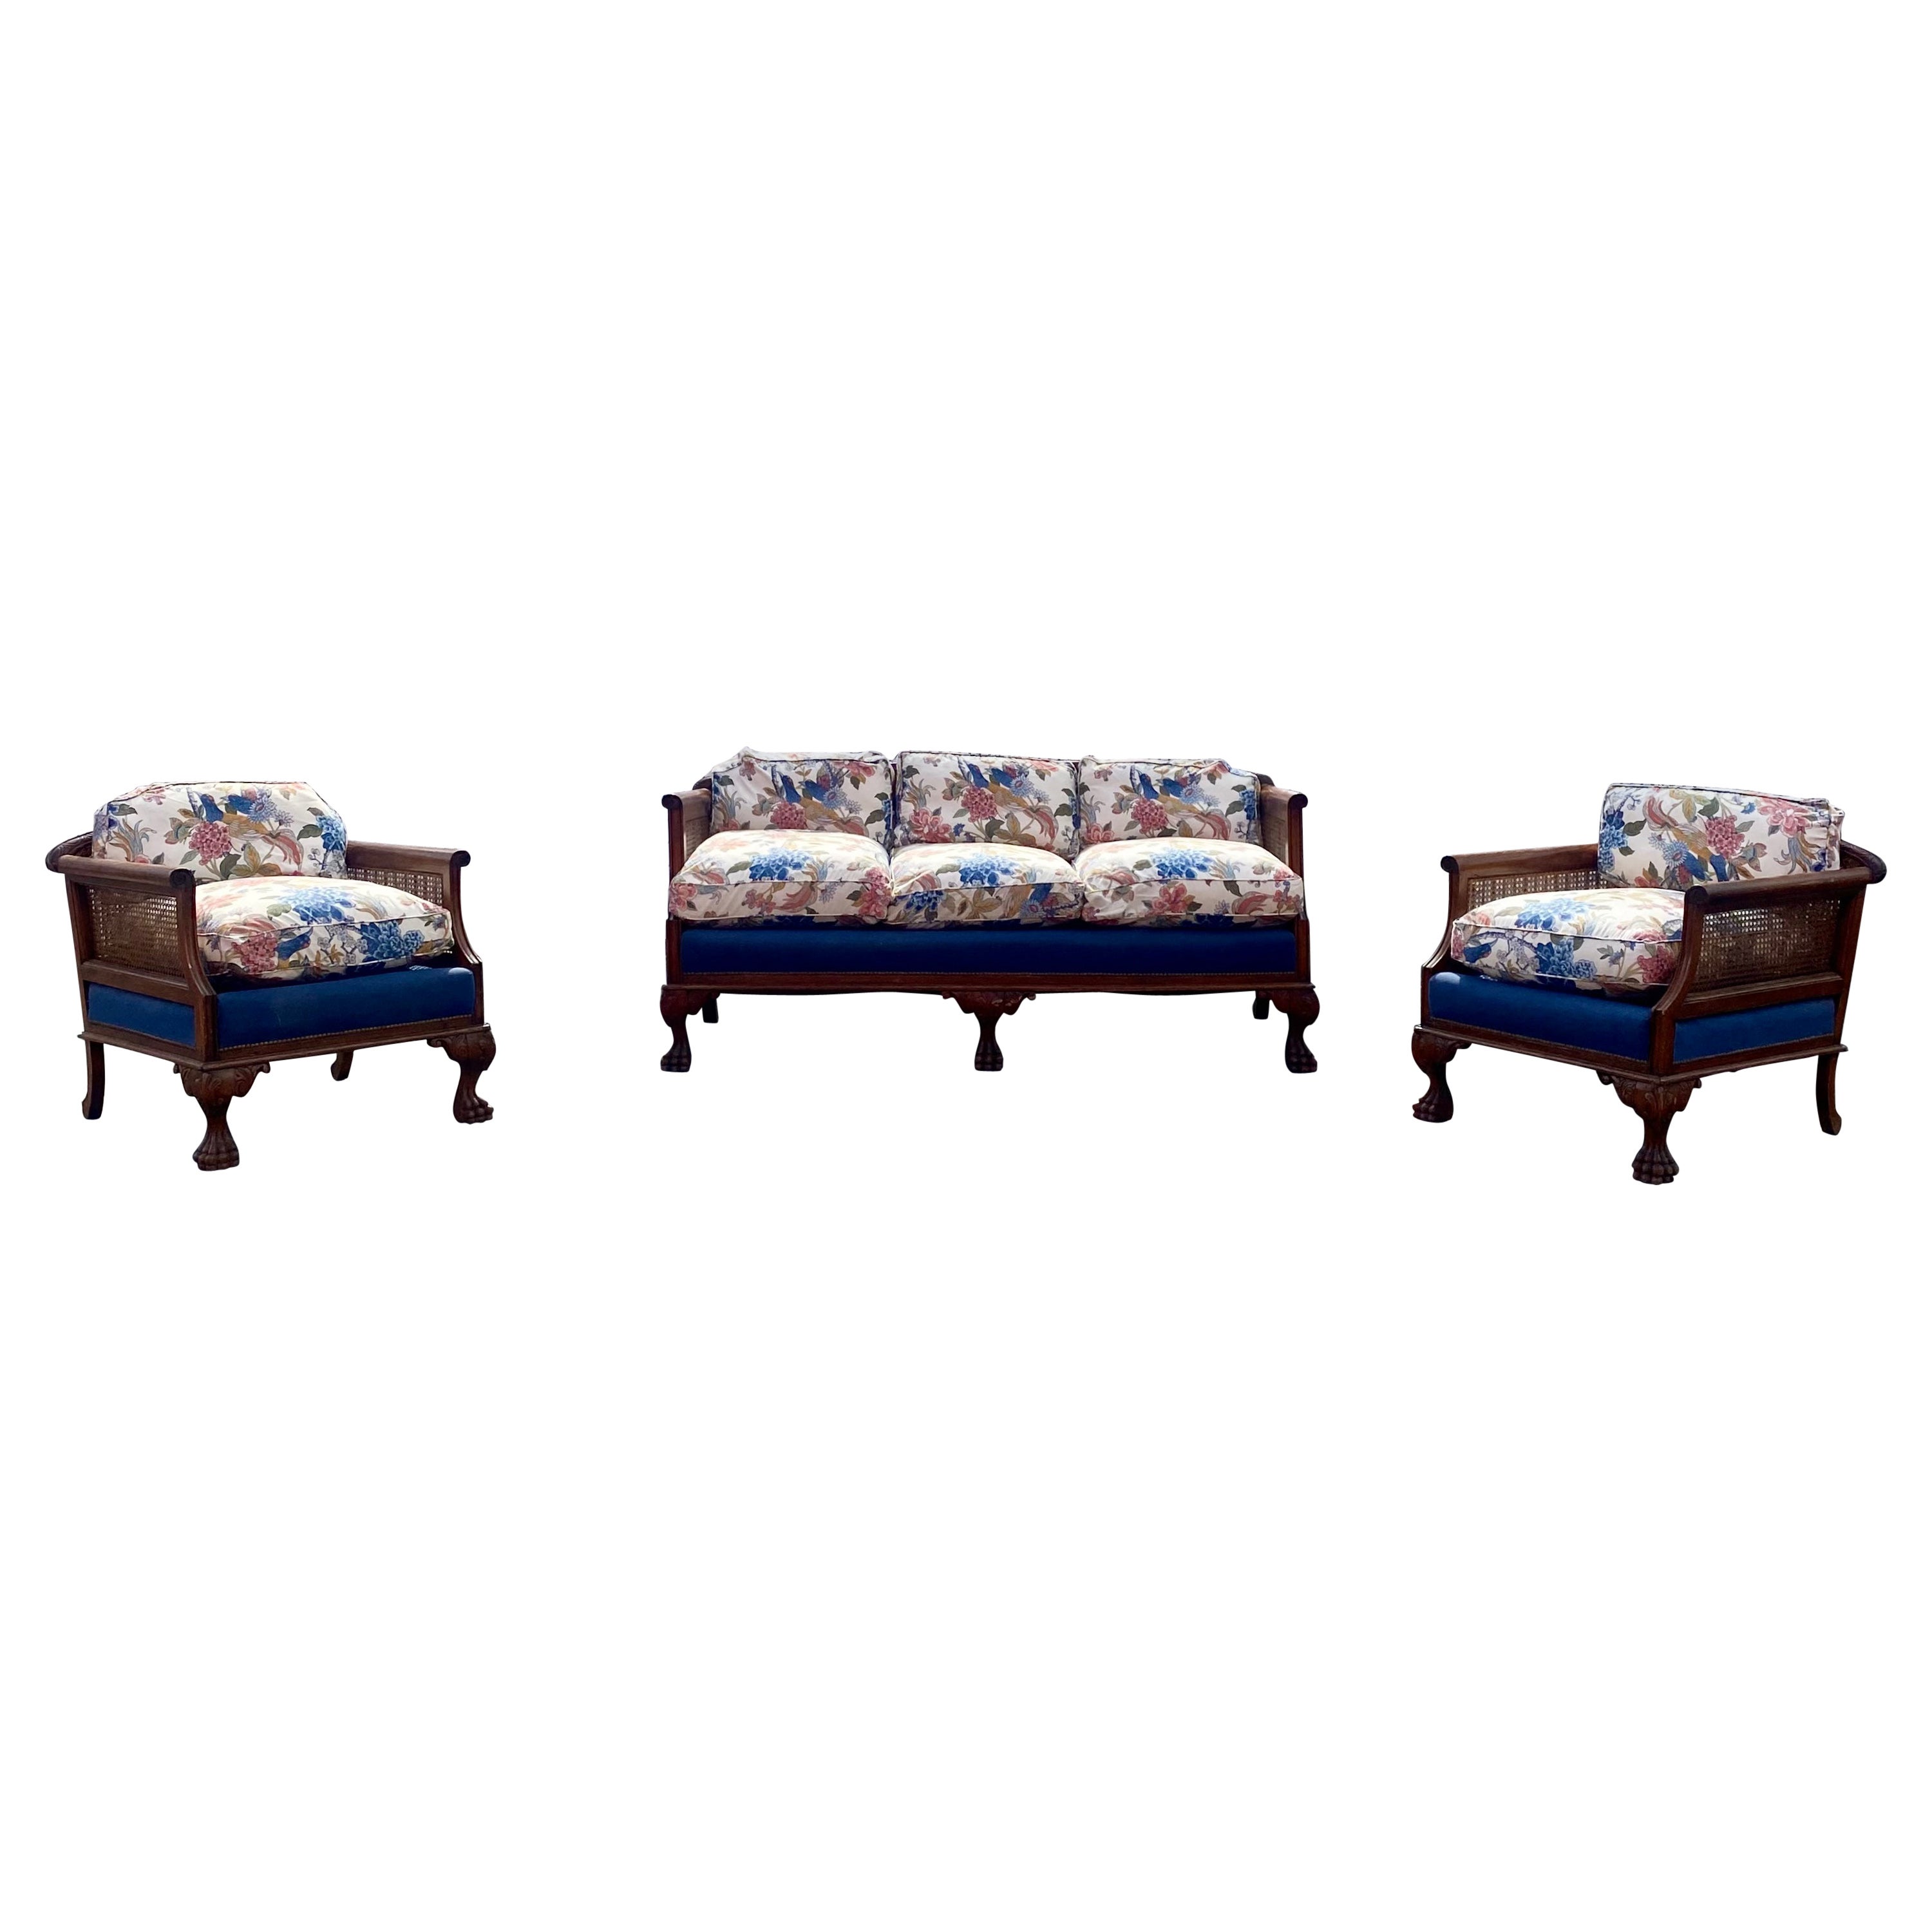 Victorian Down Chinoiserie Carved Wood Claw Rattan Cane Sofa Chairs , Set of 3 For Sale